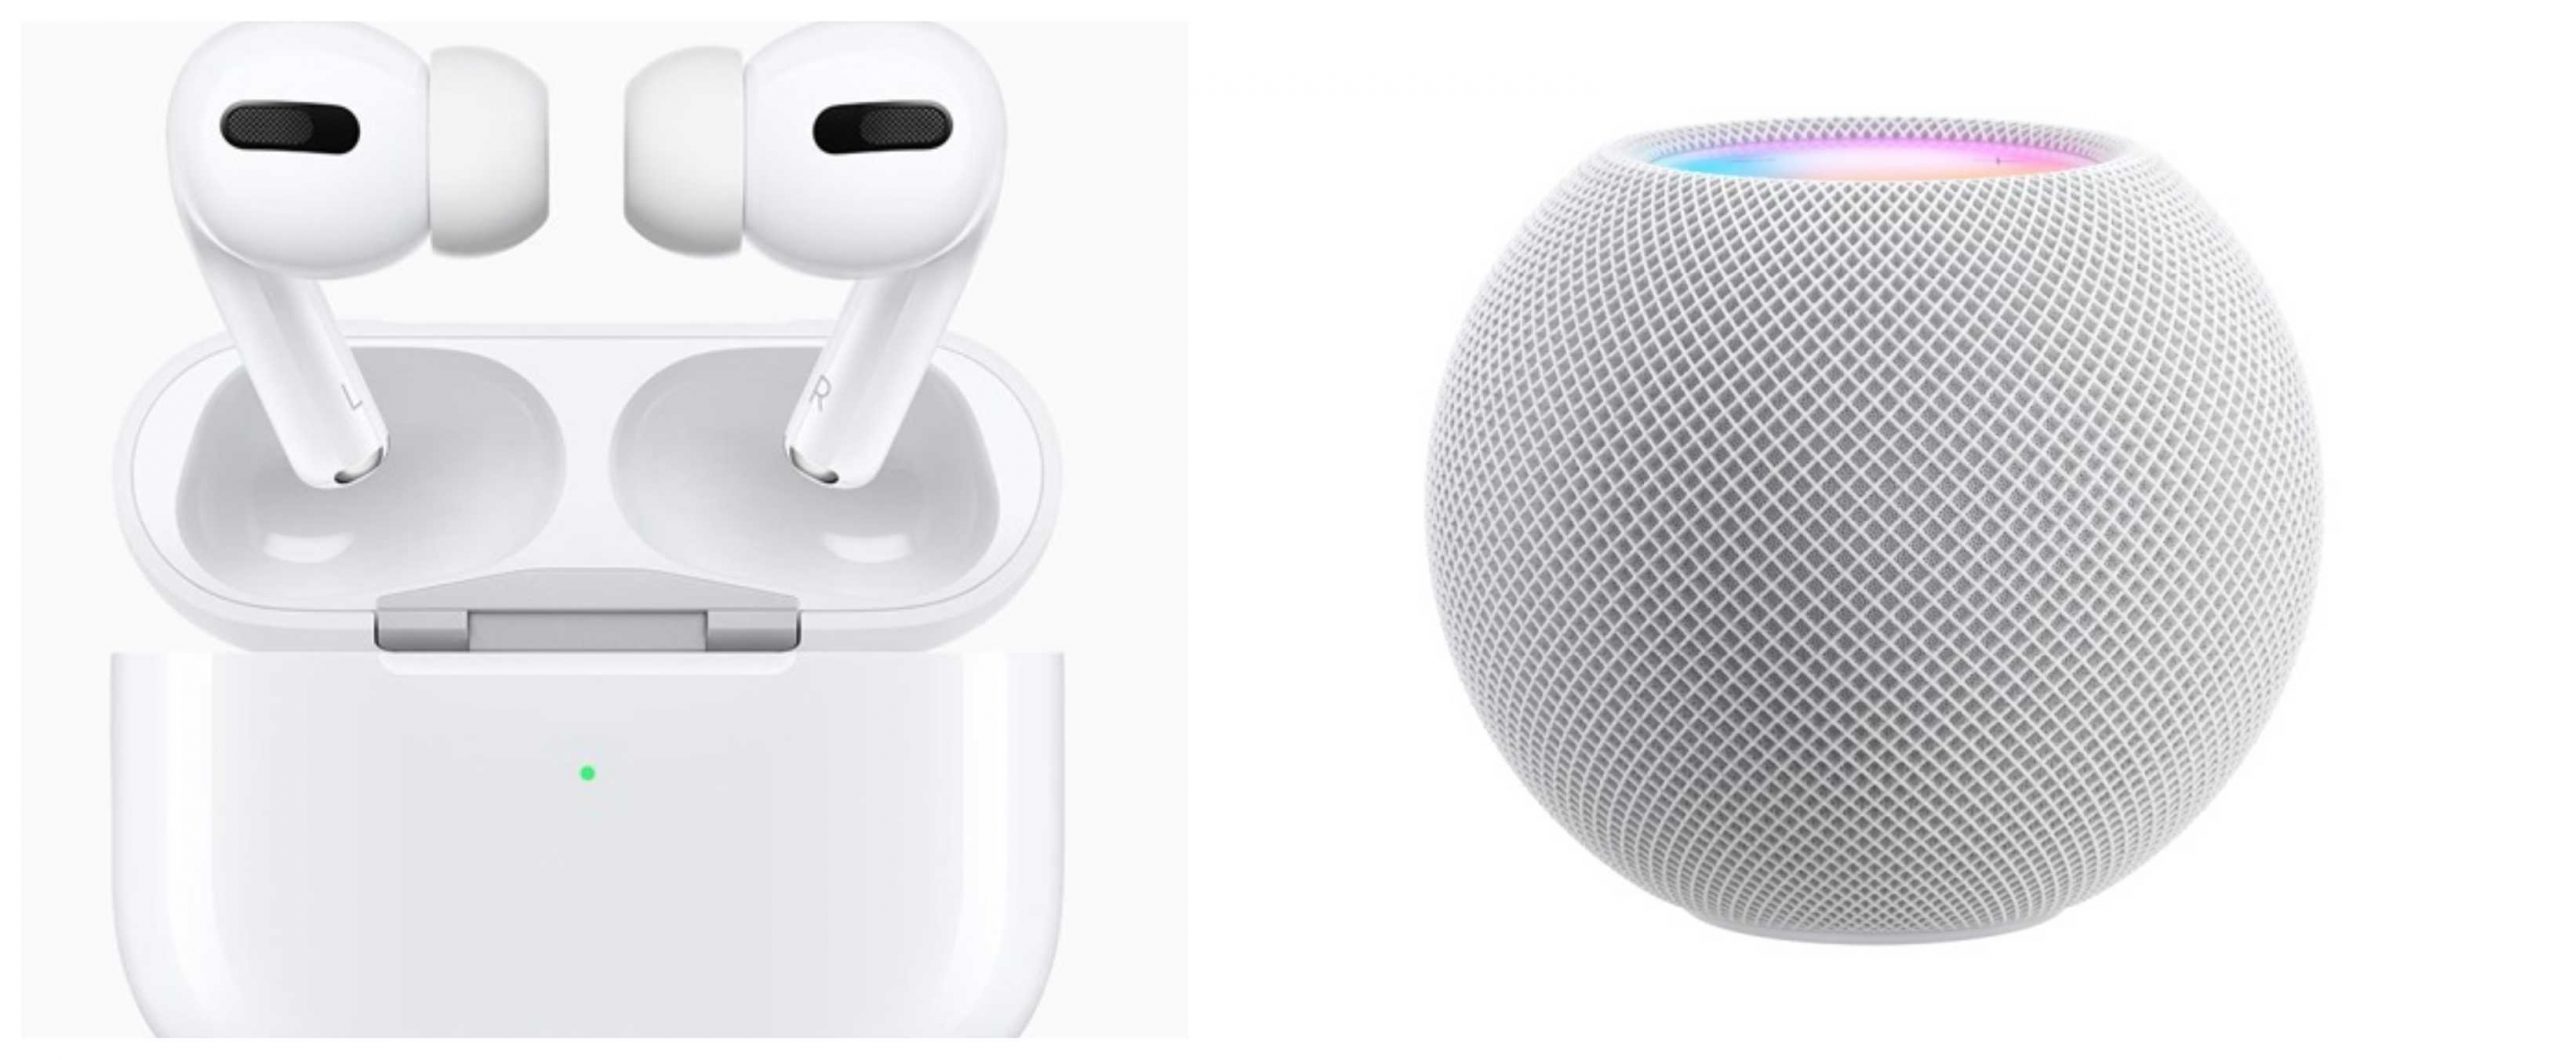 Apple AirPods 3 with AirPods Pro’s design to launch in H1 2021; AirPods Pro 2nd Gen, and new HomePod rumors